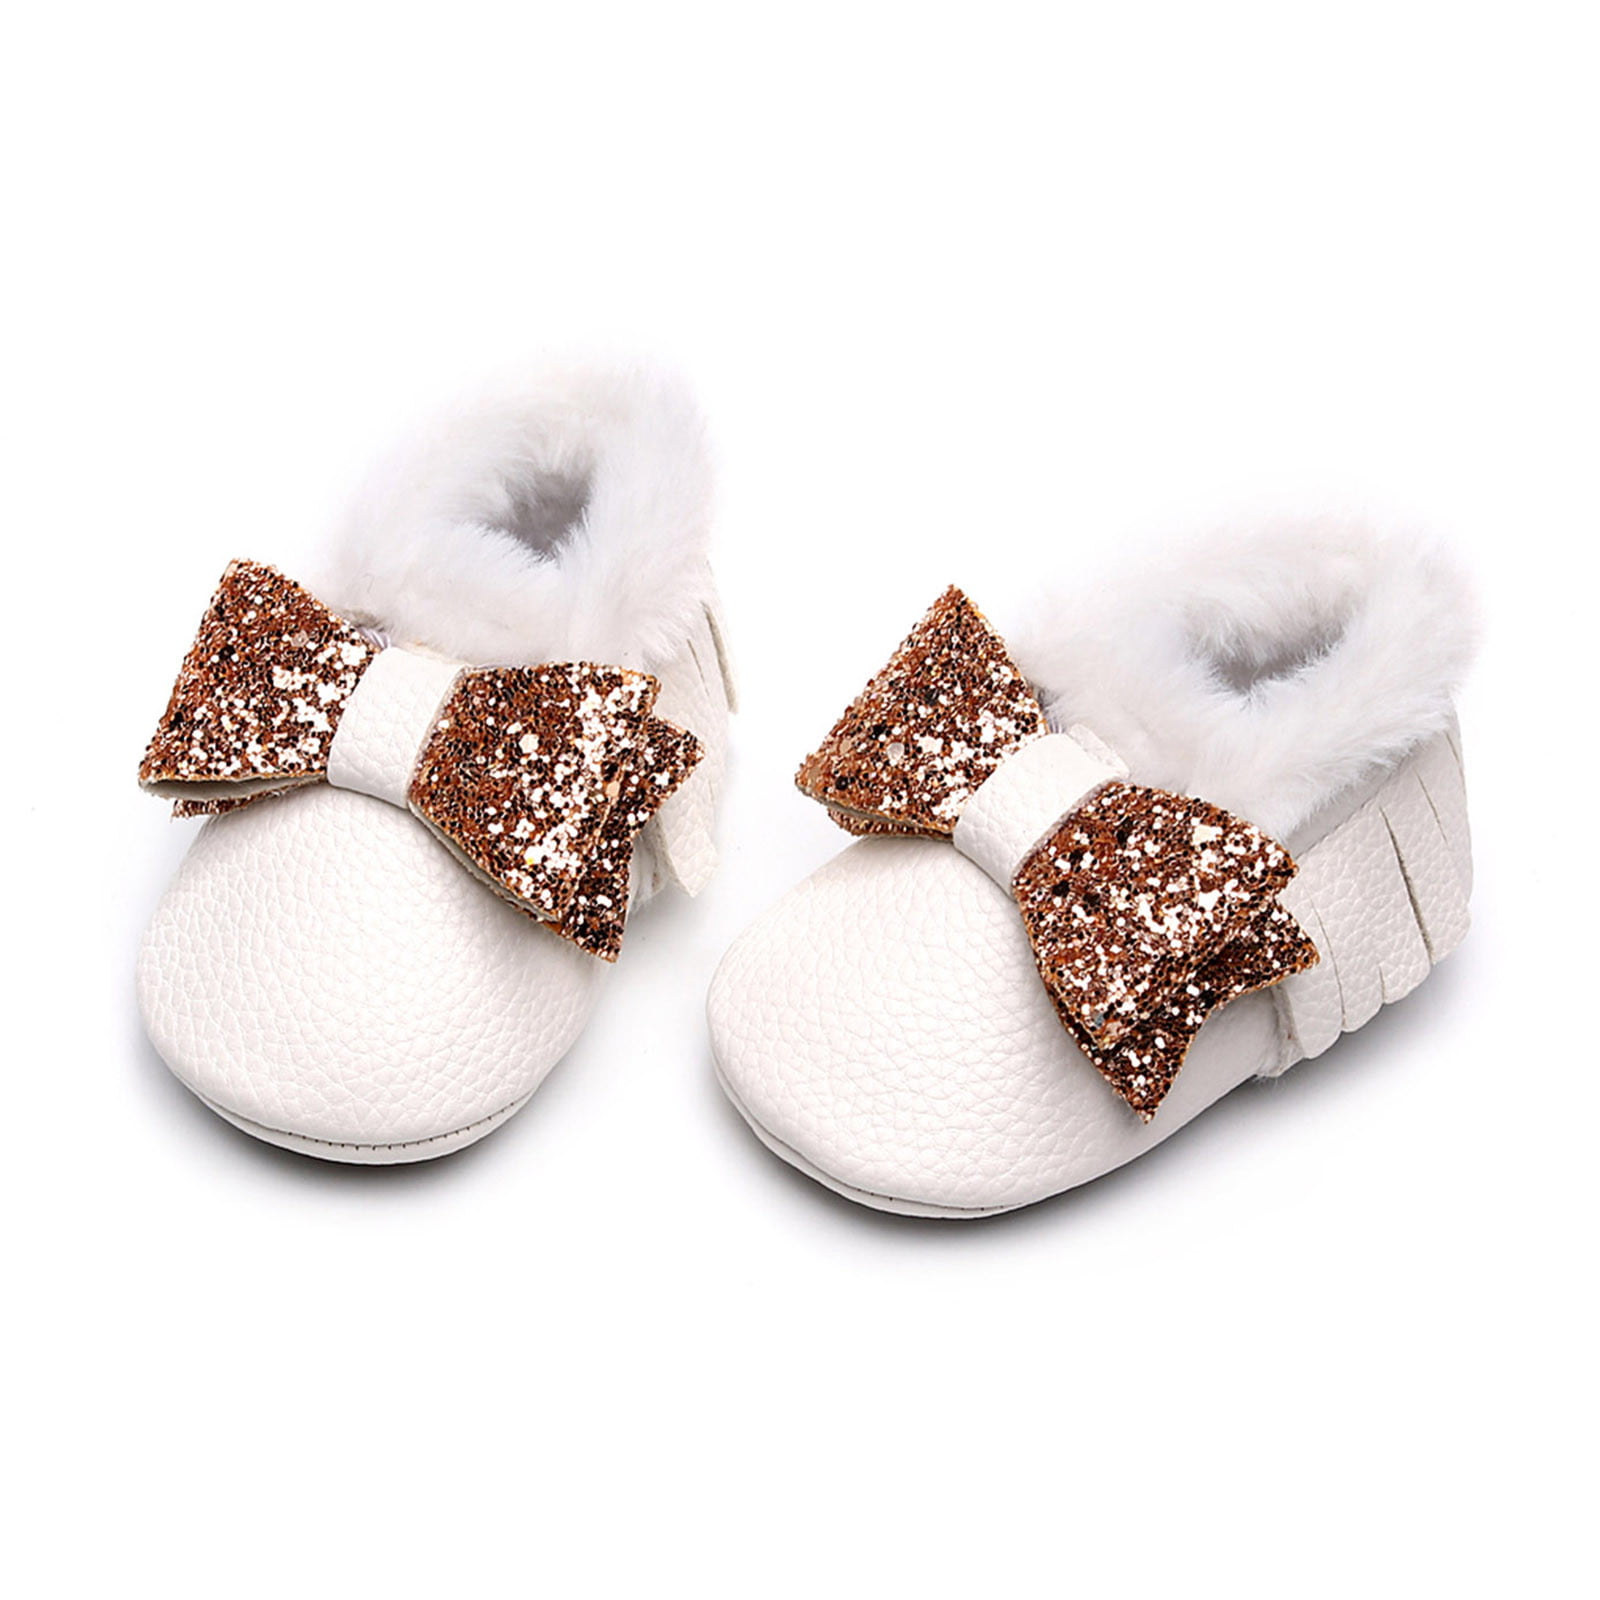 Teaching Ampere Kent NEGJ Infant Plush Cotton Baby Boots Bowknot Warm Walkers Soft Shoes Snow  Girls First Baby Shoes - Walmart.com